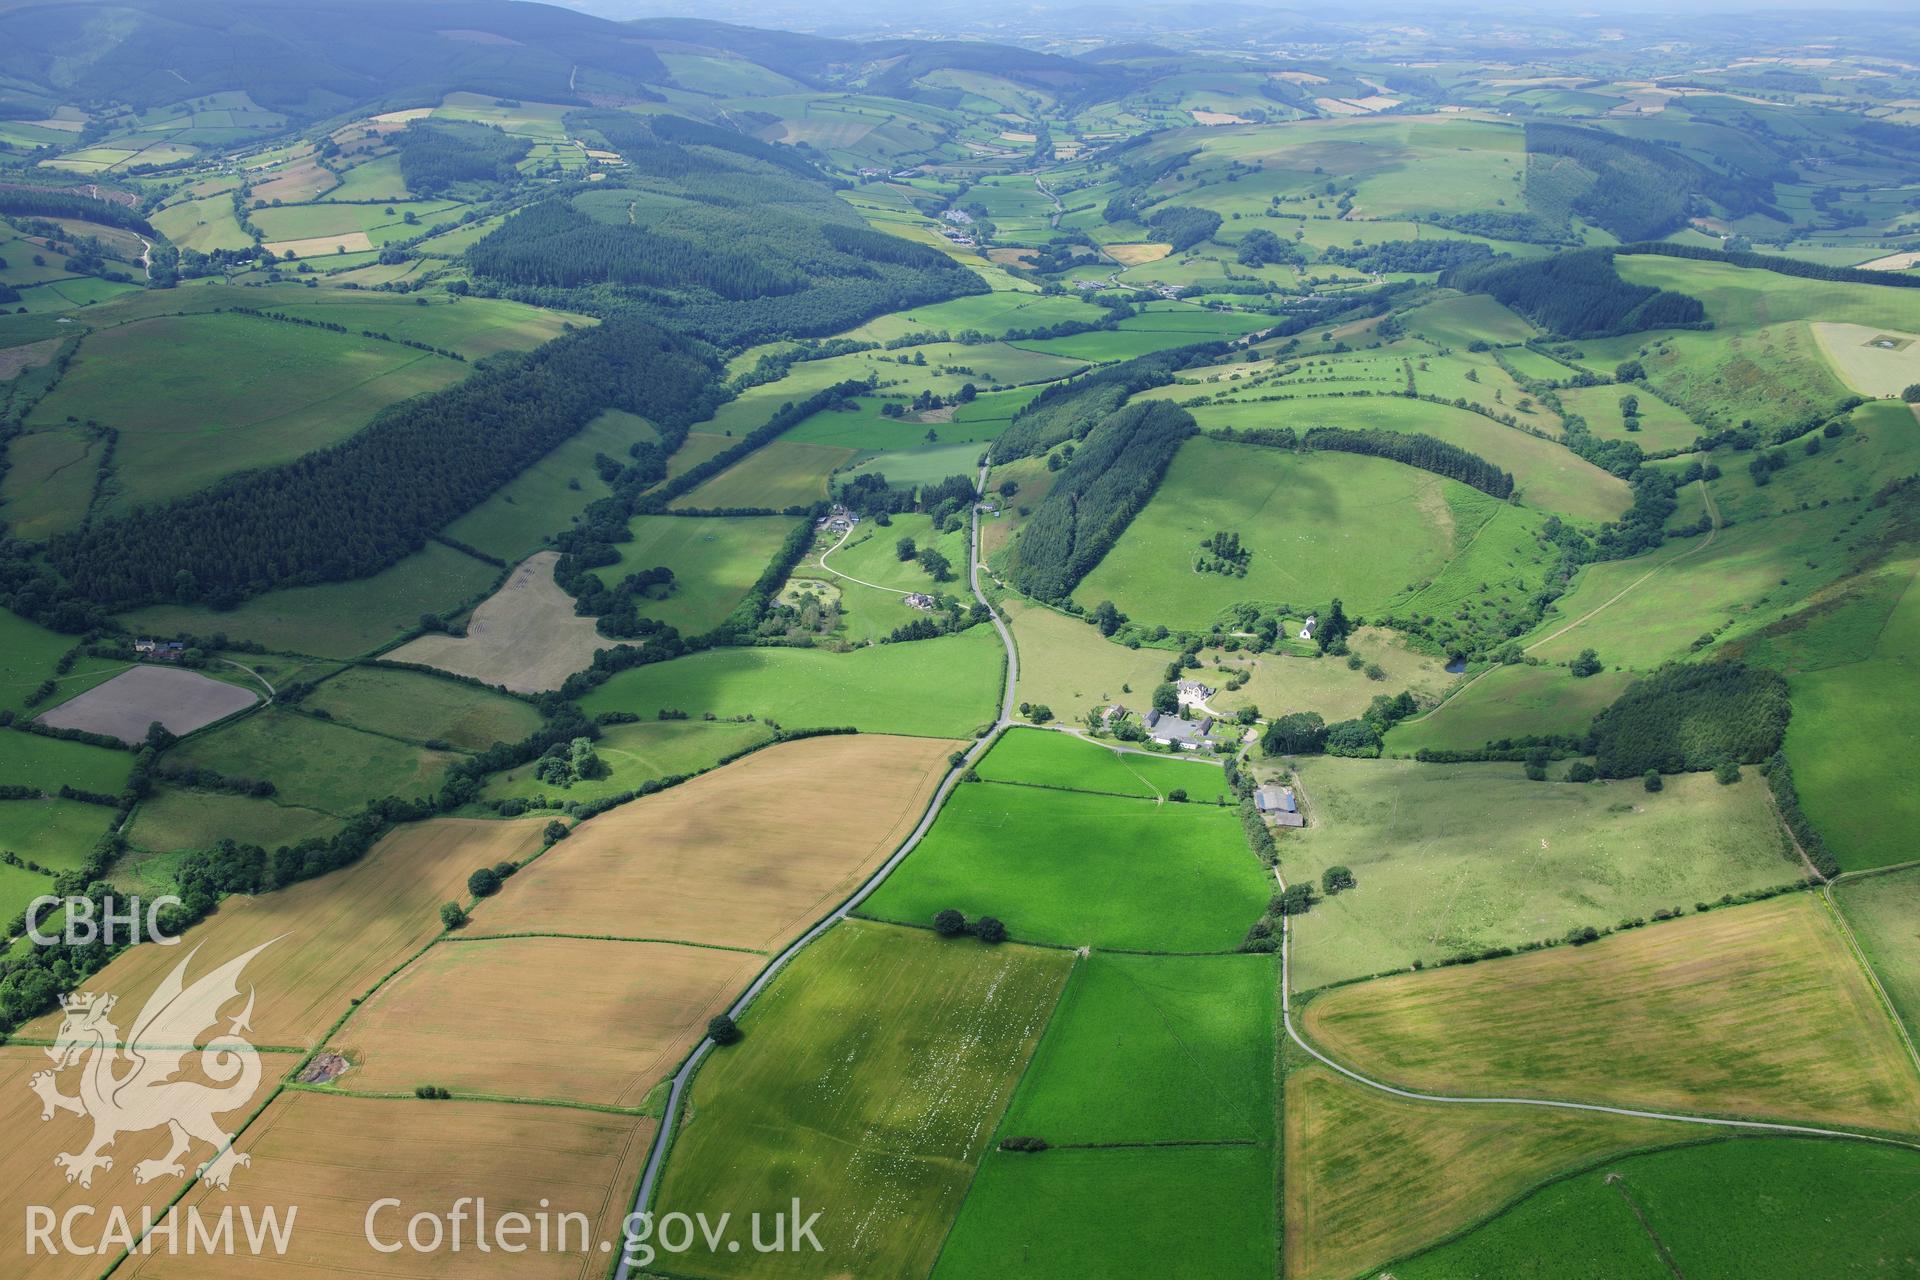 RCAHMW colour oblique photograph of Pilleth, battle site, landscape from east. Taken by Toby Driver on 27/07/2012.